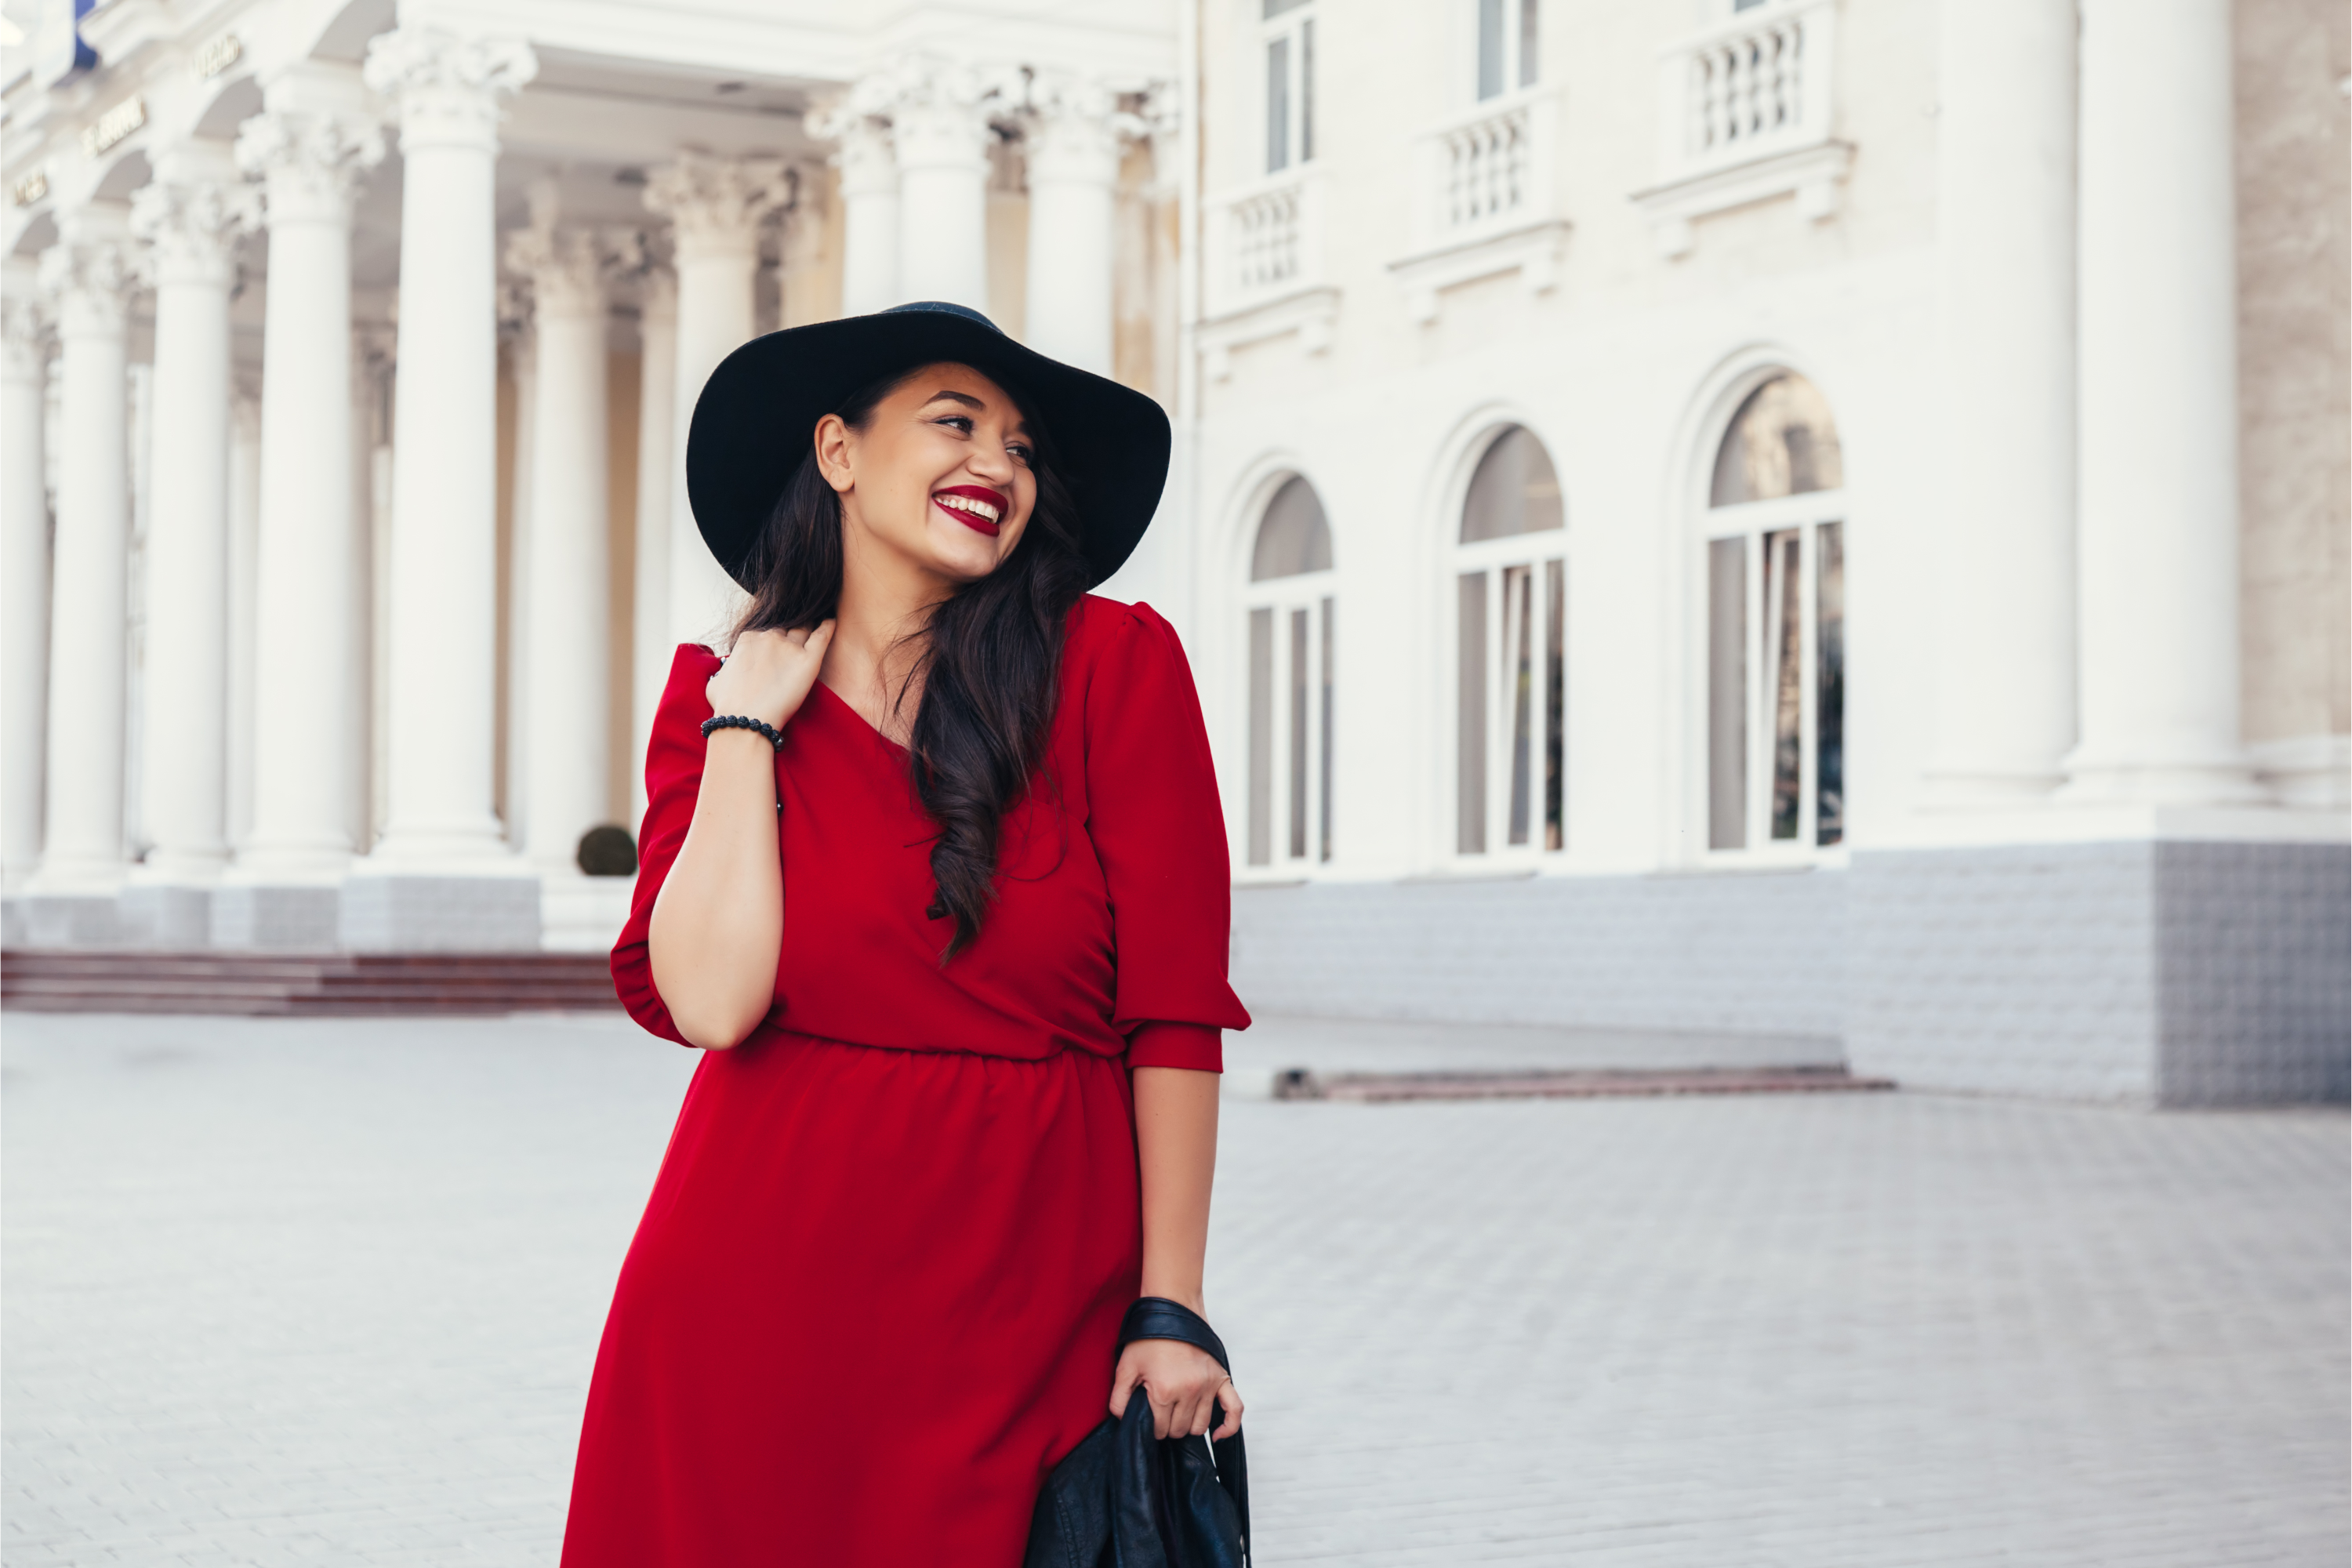 Plus Size Fashion: 10 Outfit Ideas to Look and Feel Your Best